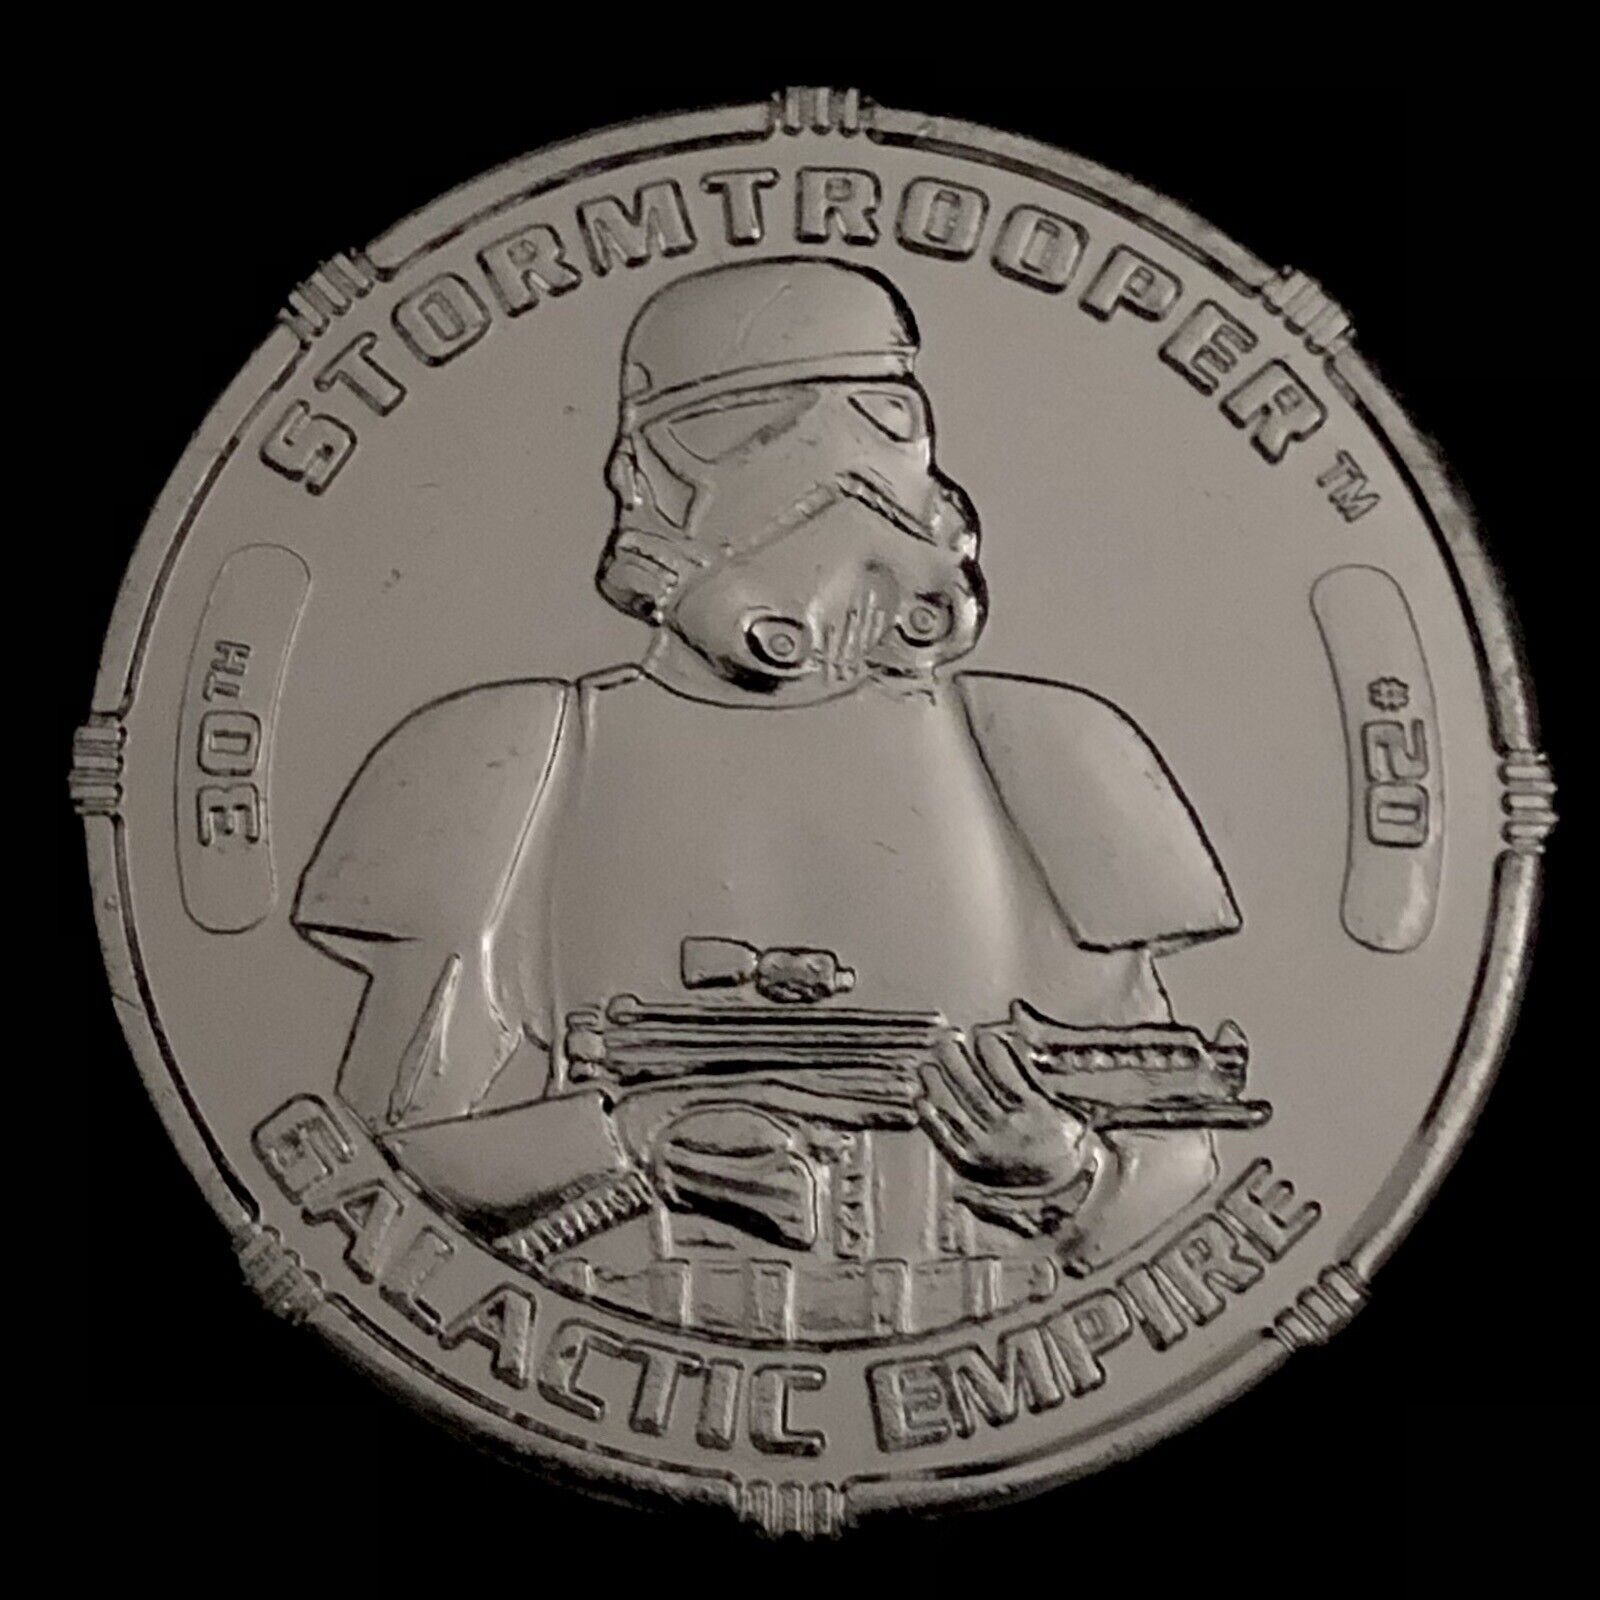 Star Wars Stormtrooper 30th ANNIVERSARY COIN #20 A New Hope Galactic Empire ANH